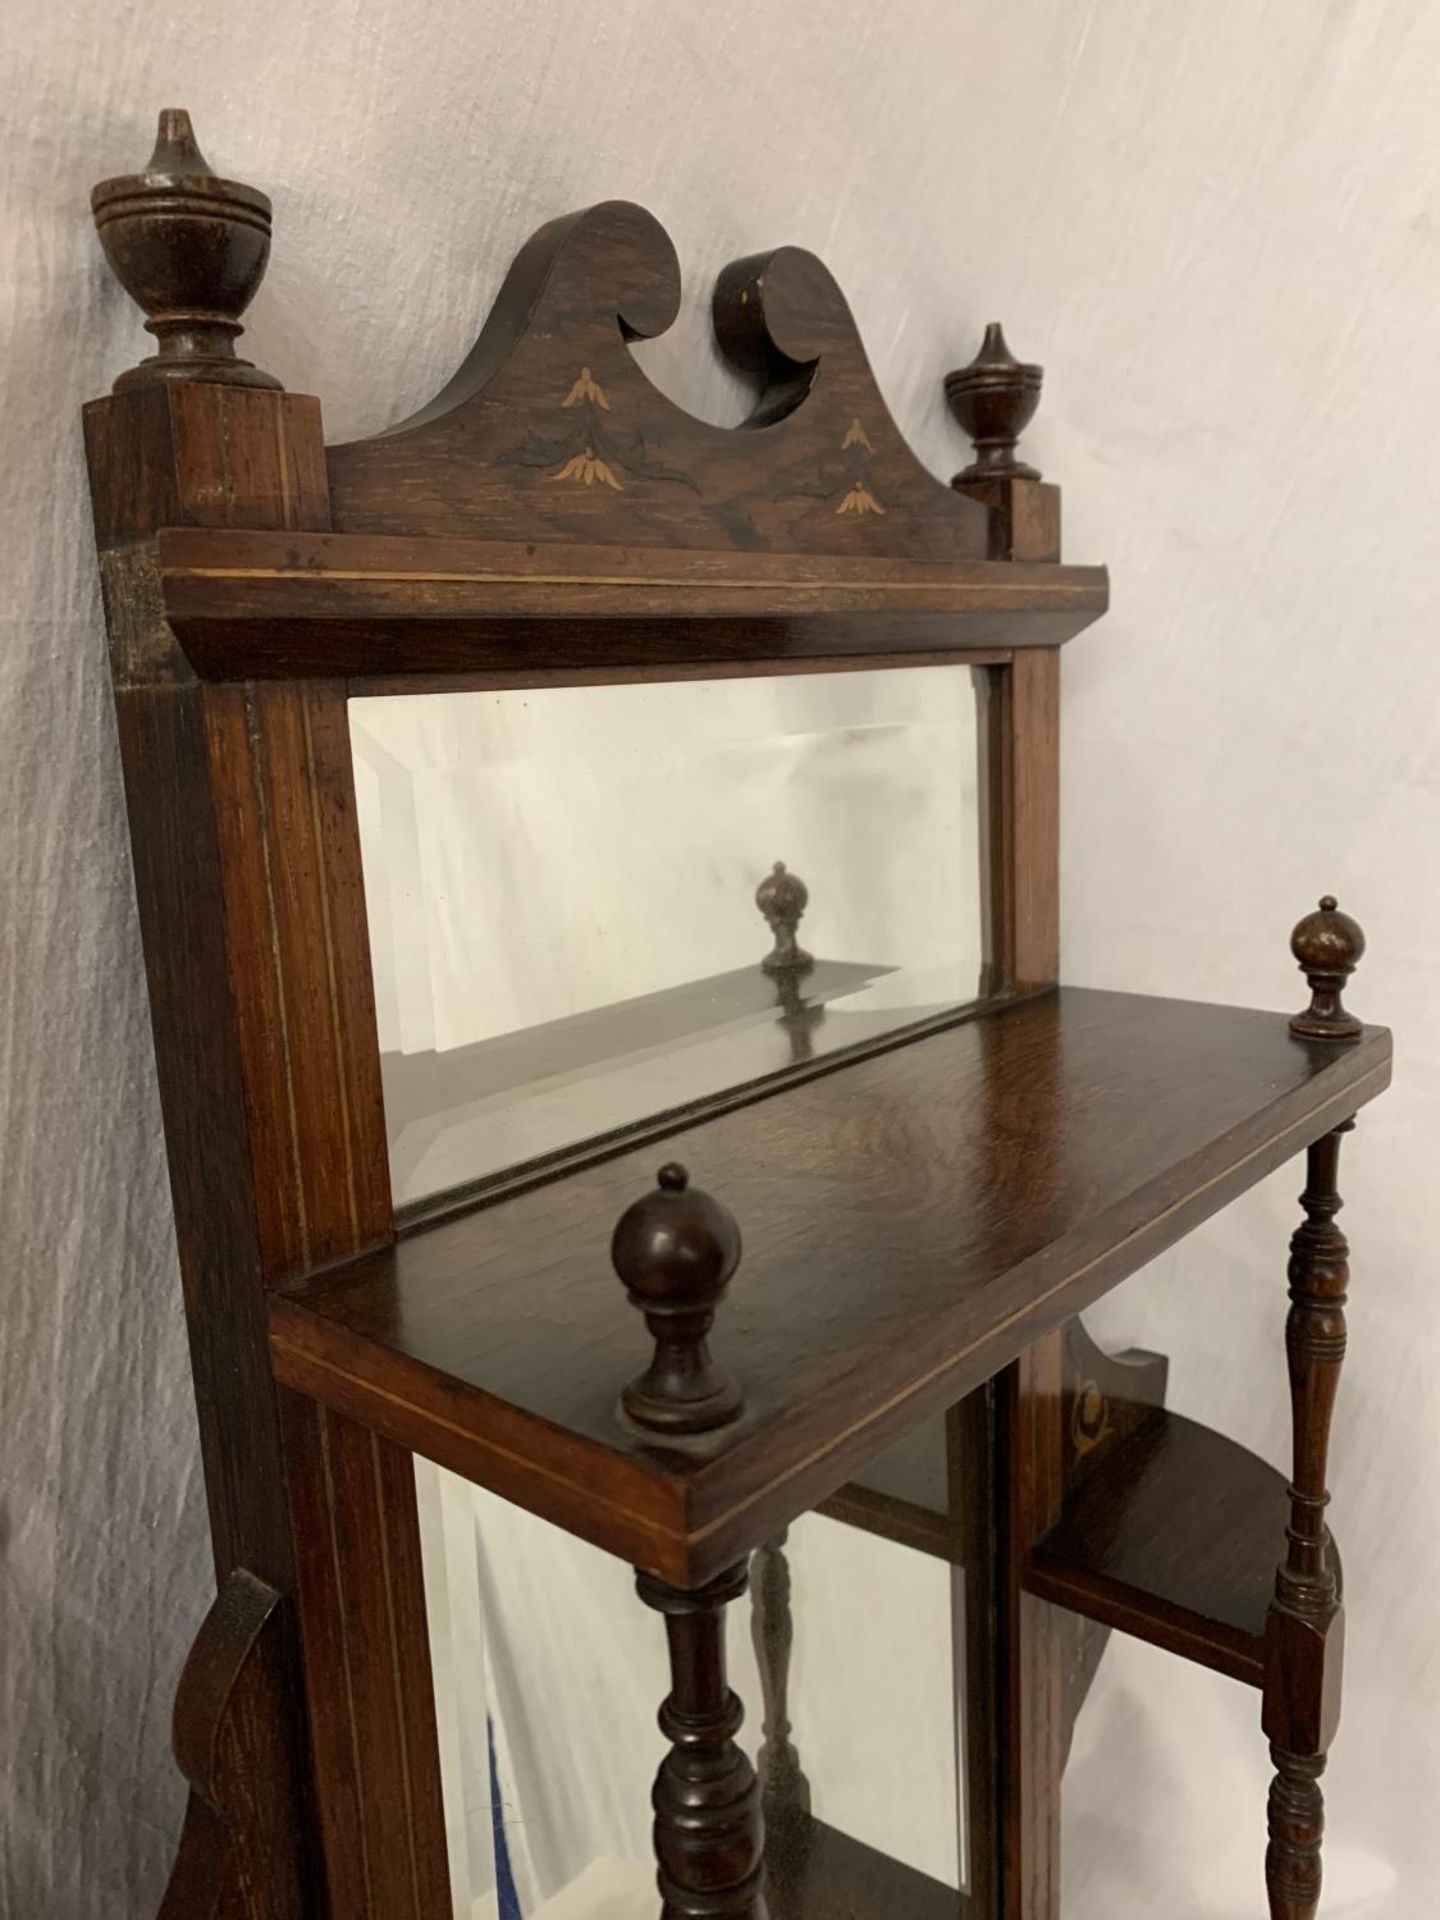 A VINTAGE MAHOGANY HALL MIRROR SHELF WITH FINIALS AND INLAY 61CM X 45.5CM - Image 4 of 4